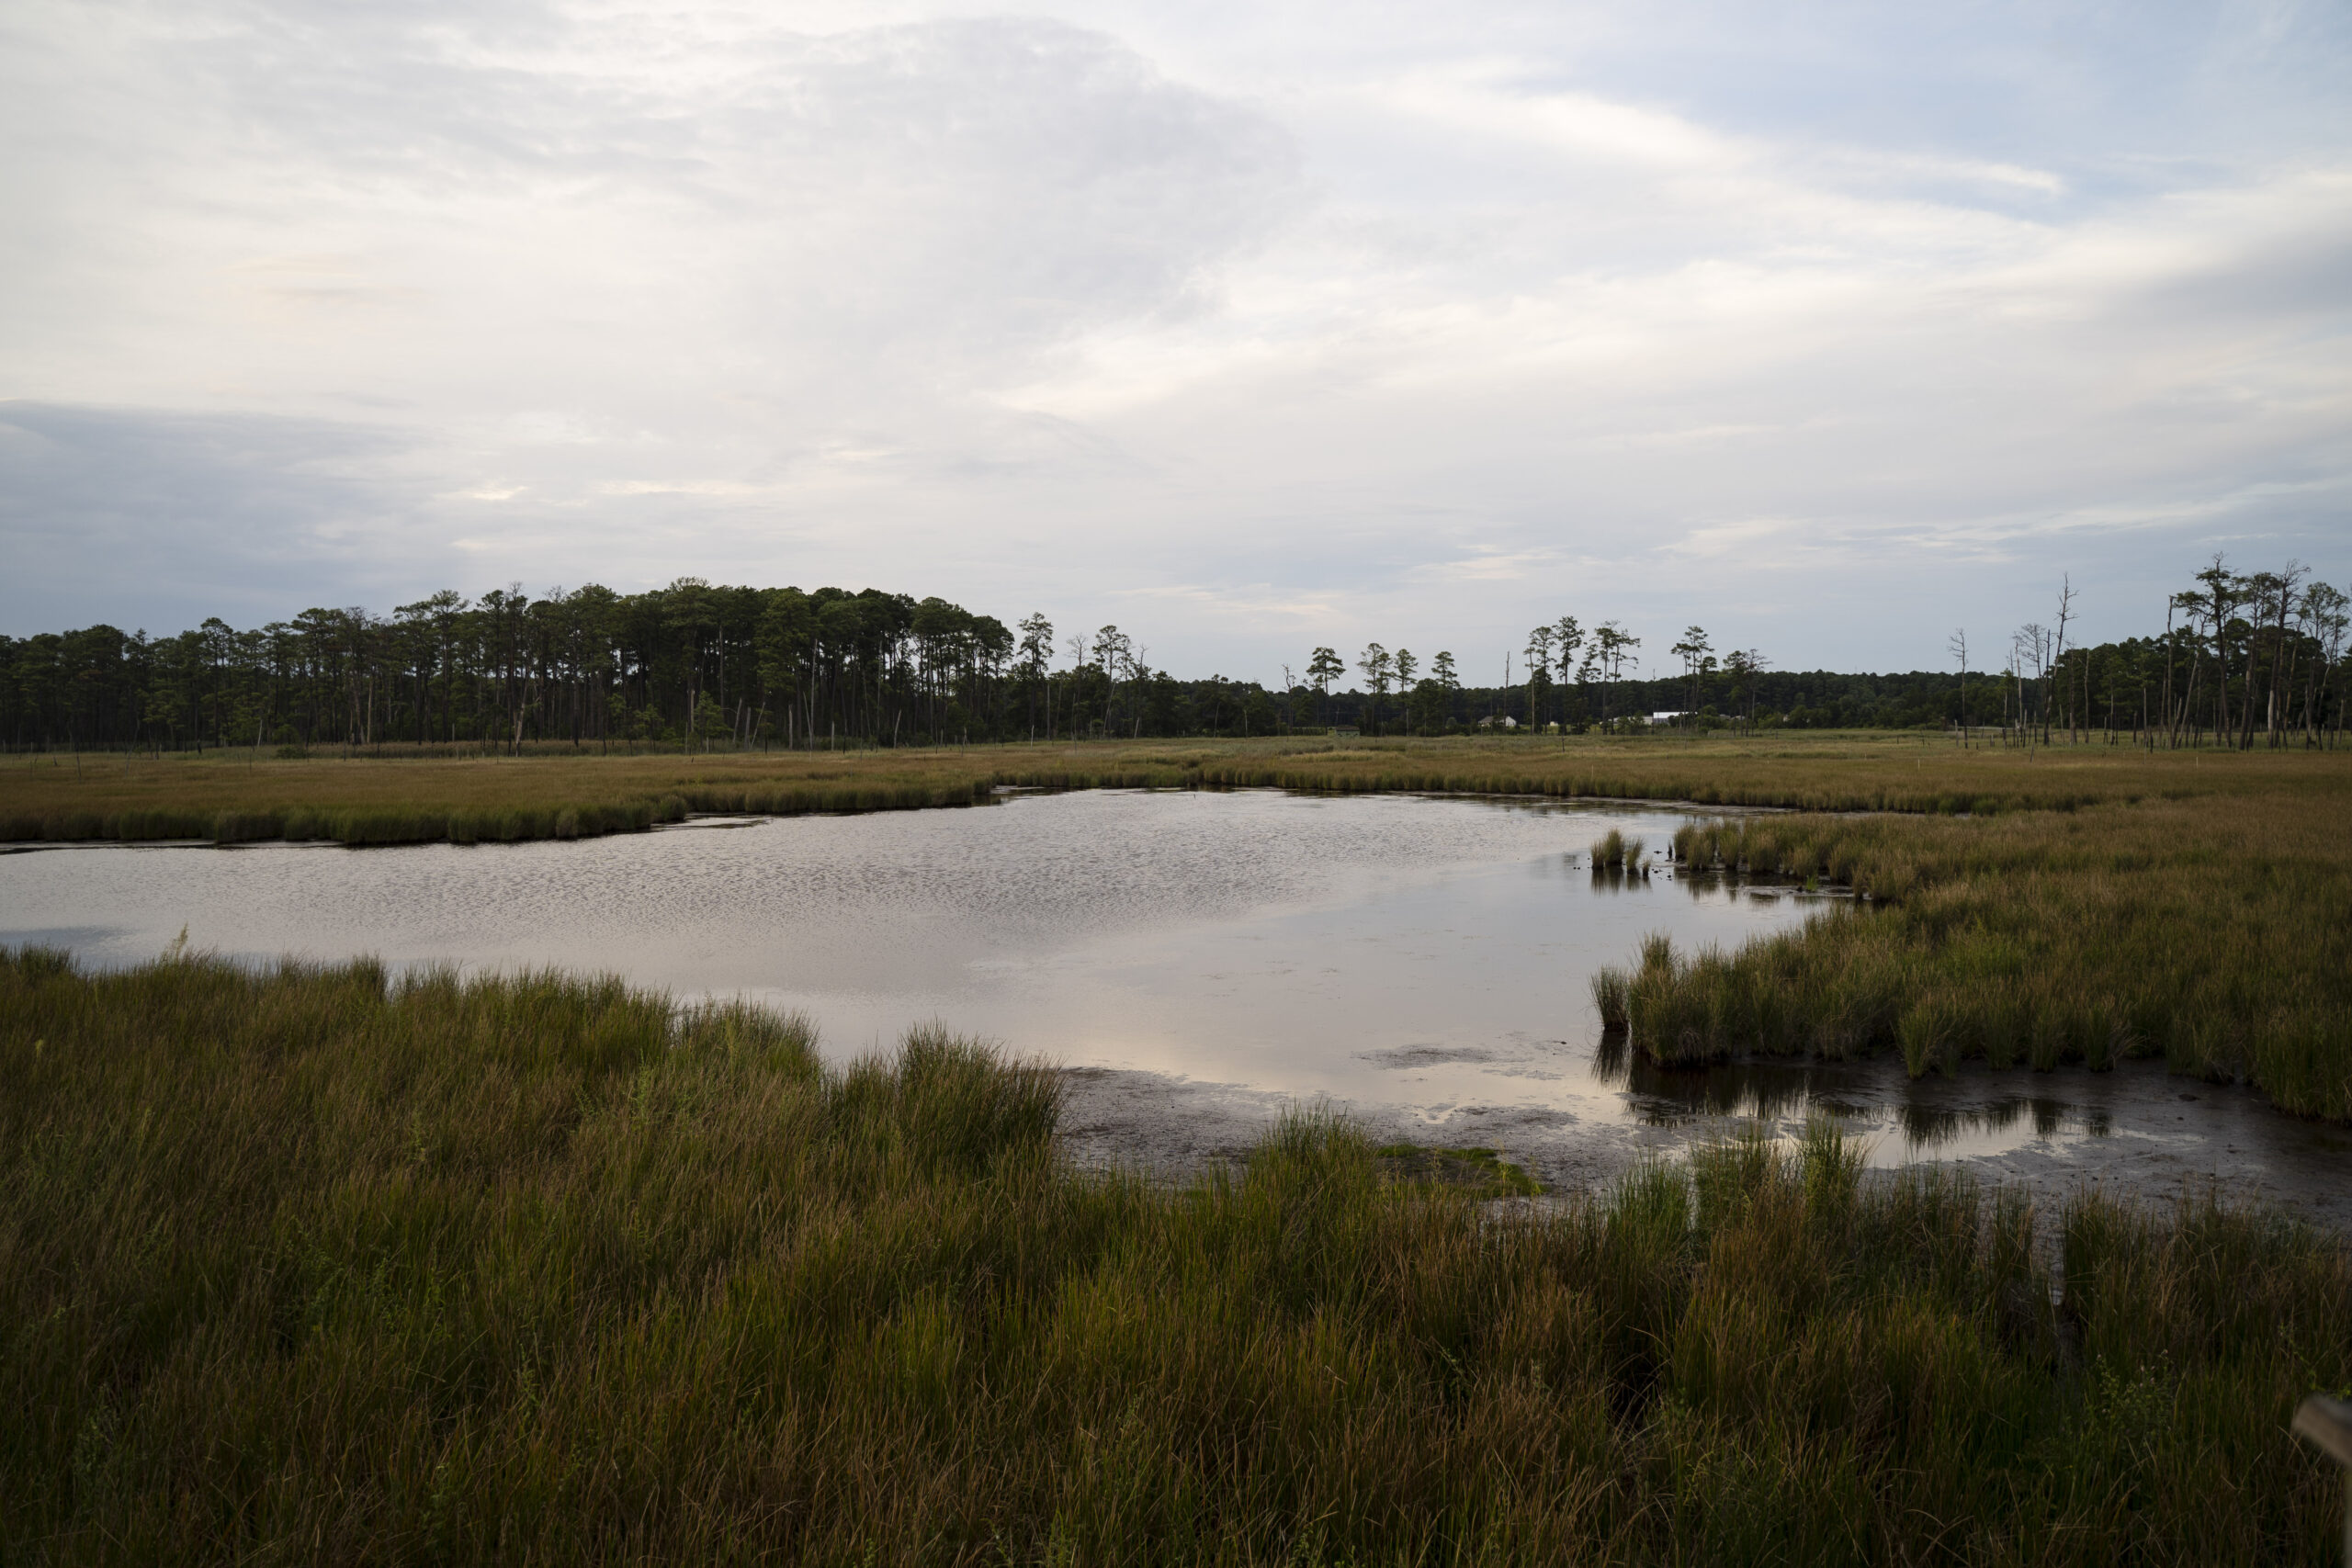 View of the marsh and marsh grasses with forest in the background